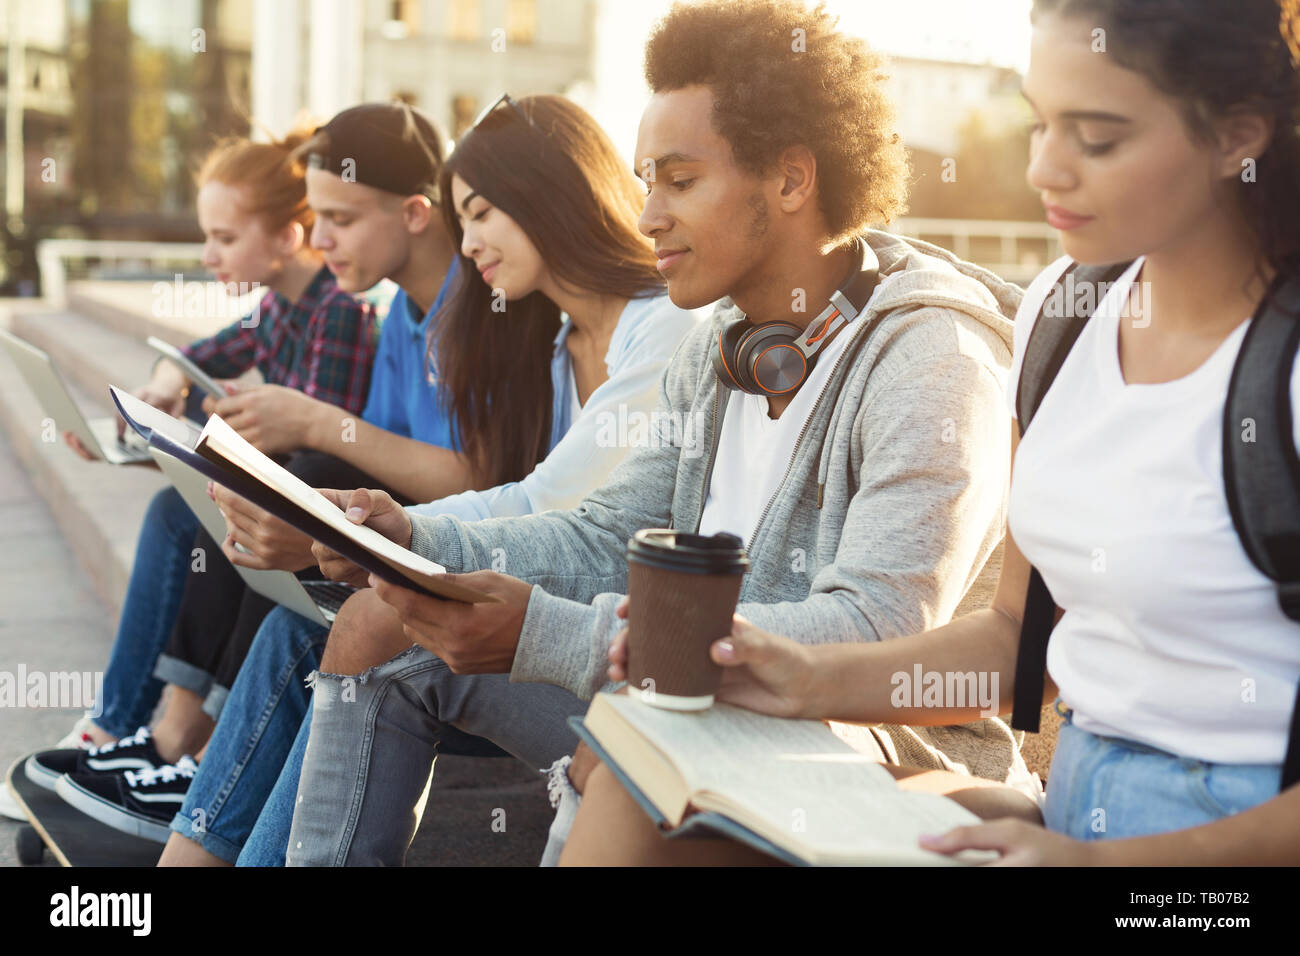 Teenage Diverse Students Studying Outdoors in Evening Stock Photo